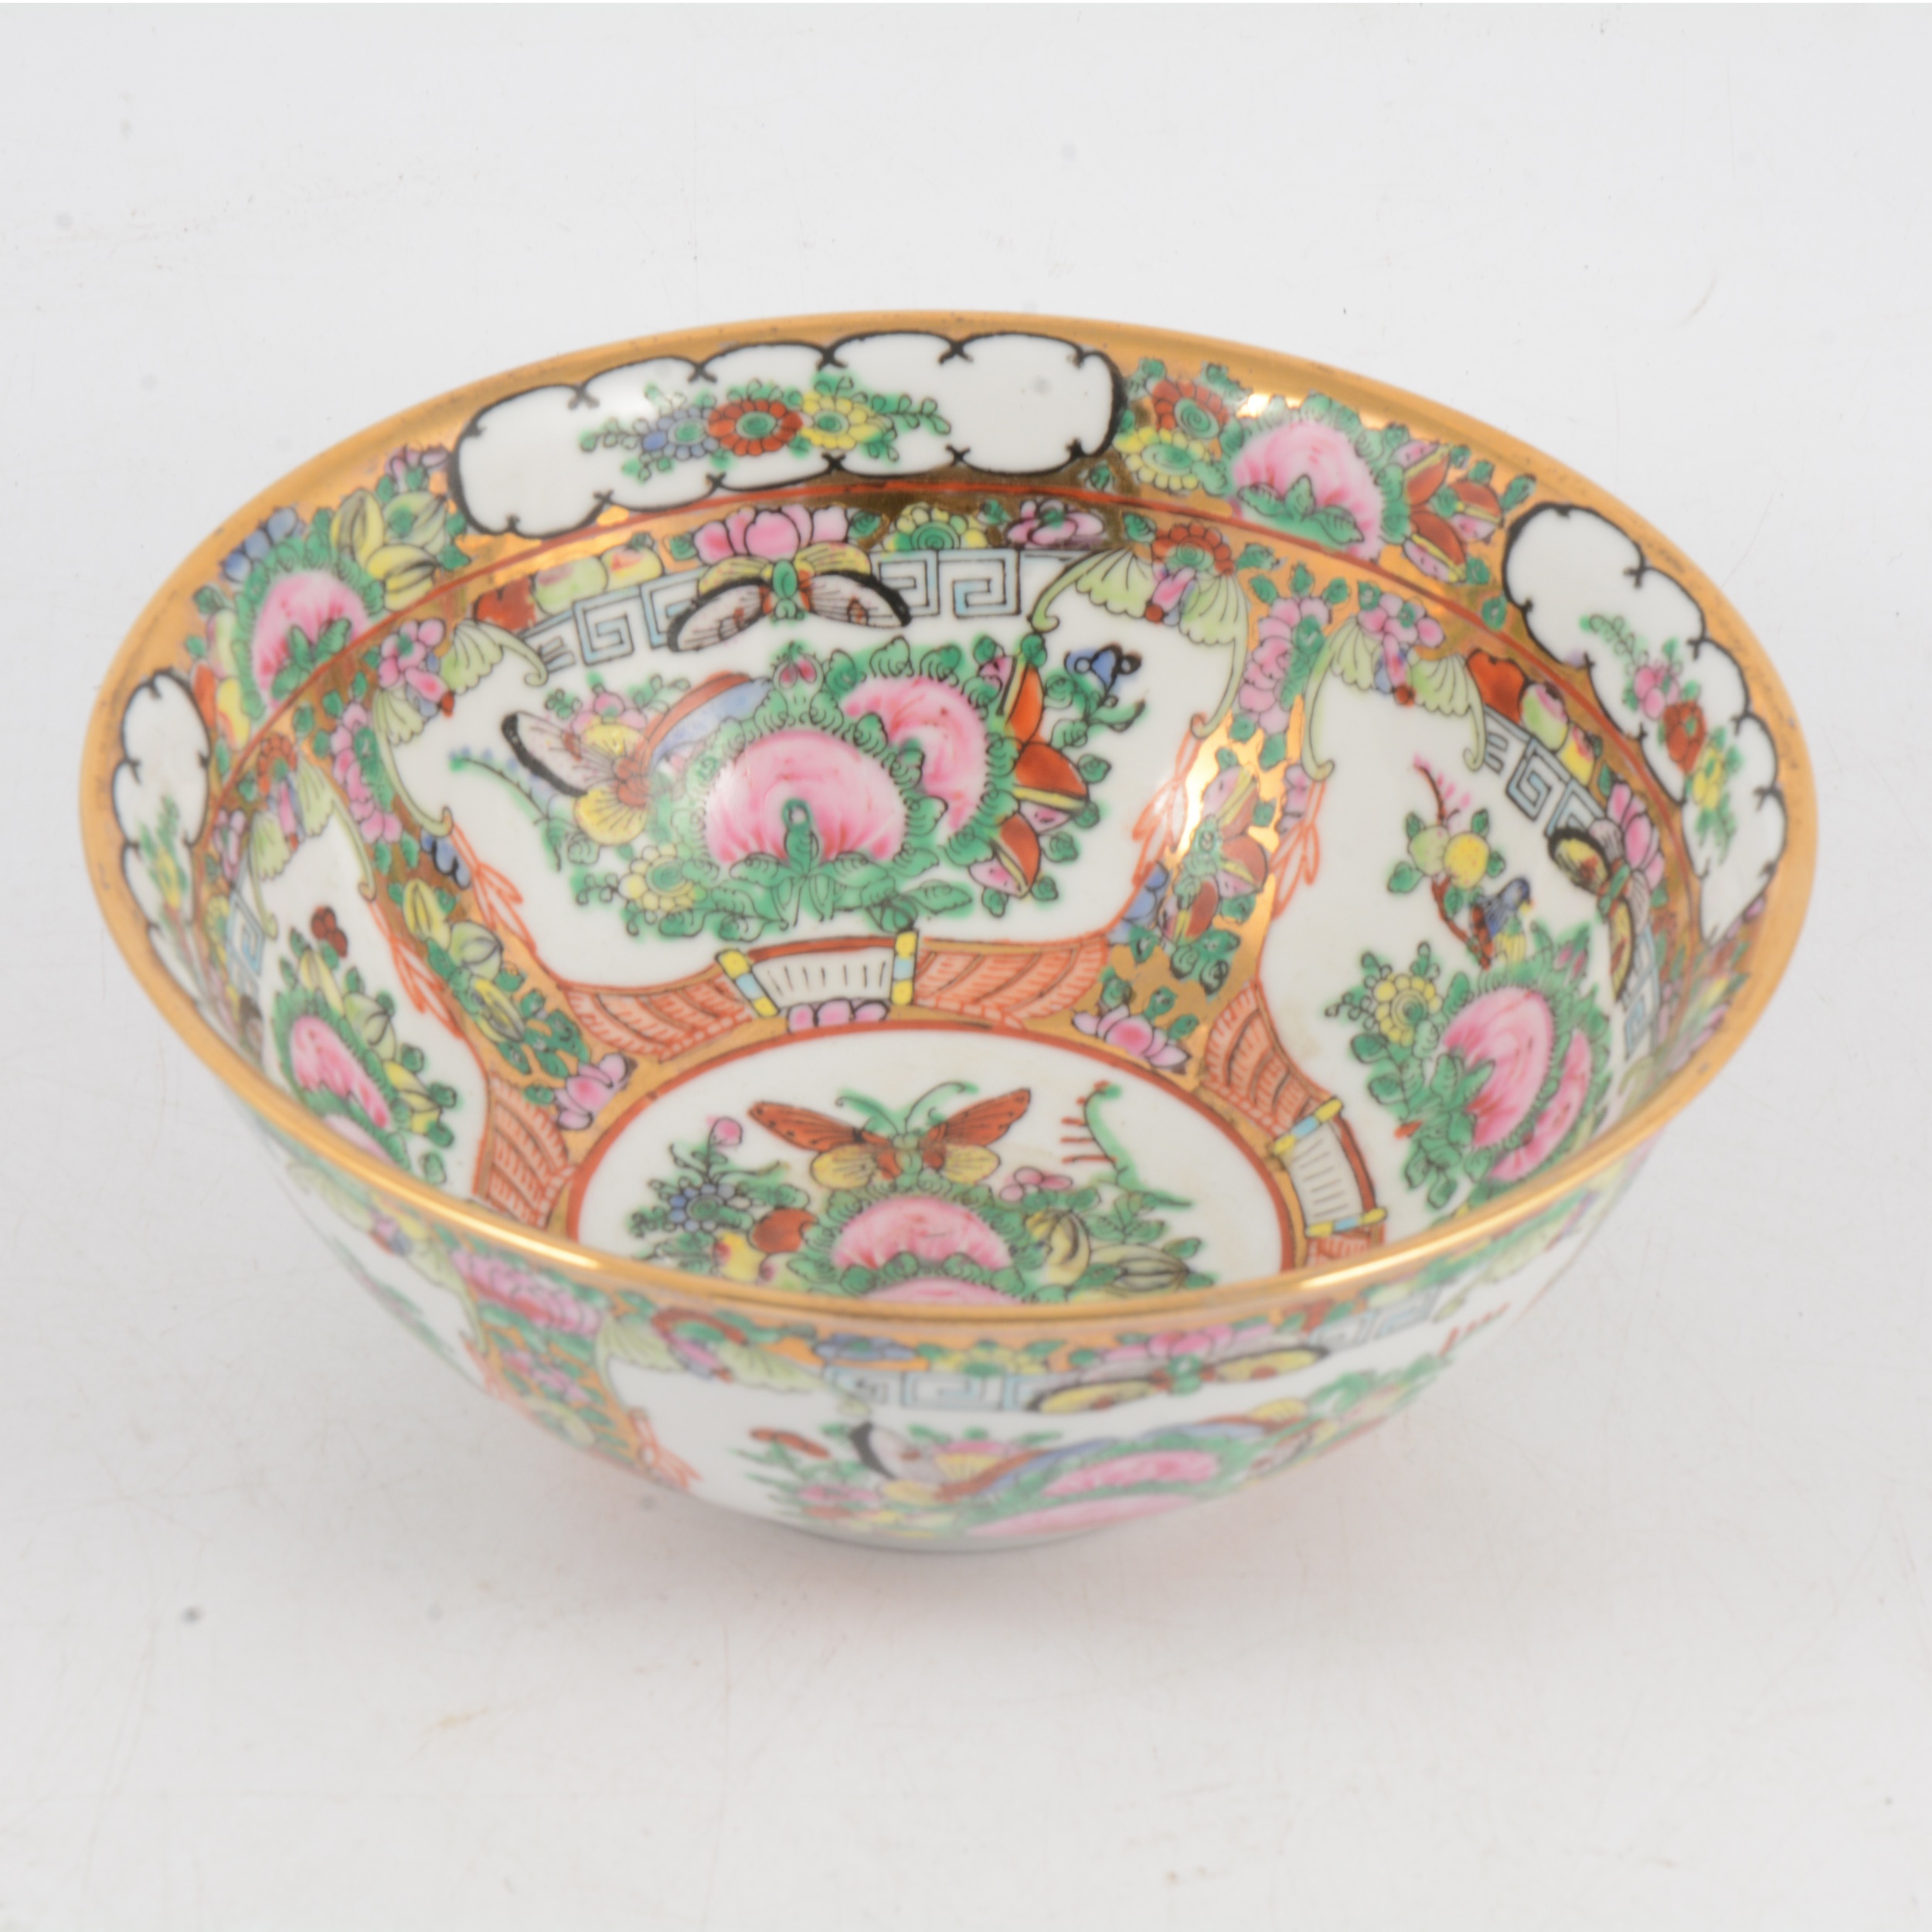 A reproduction Chinese porcelain rosebowl - Image 2 of 5